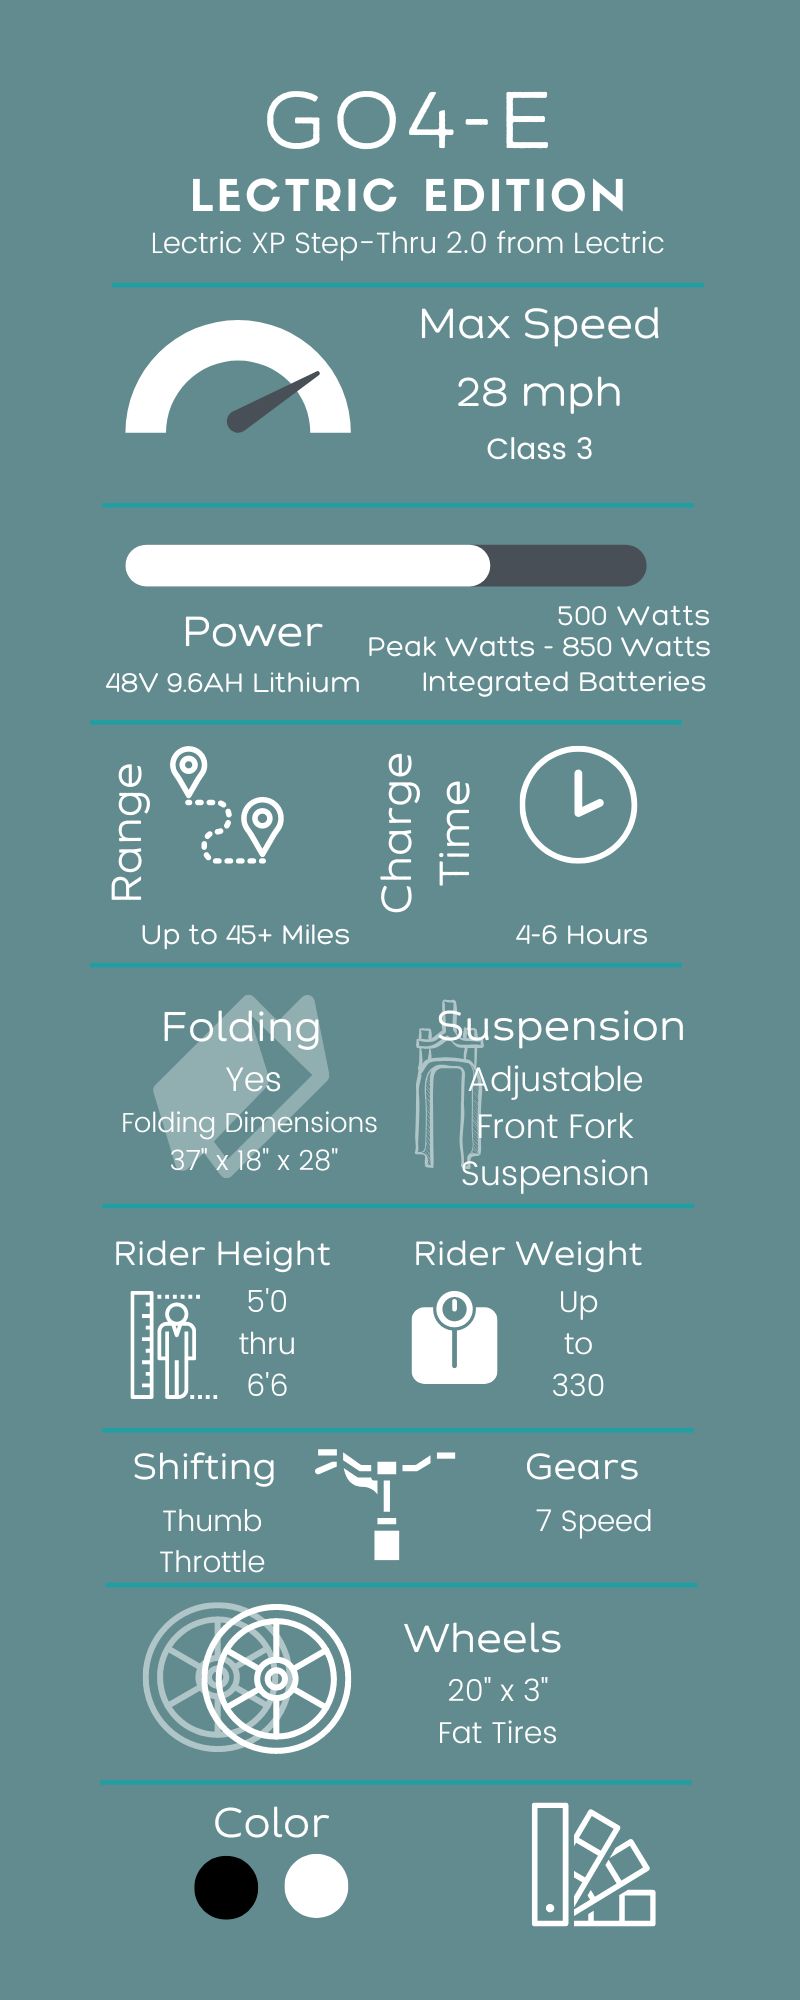 Infographic about the speed, range, charge time and more for the Natko Pony 250W Quadrike from Blackbird Bikes